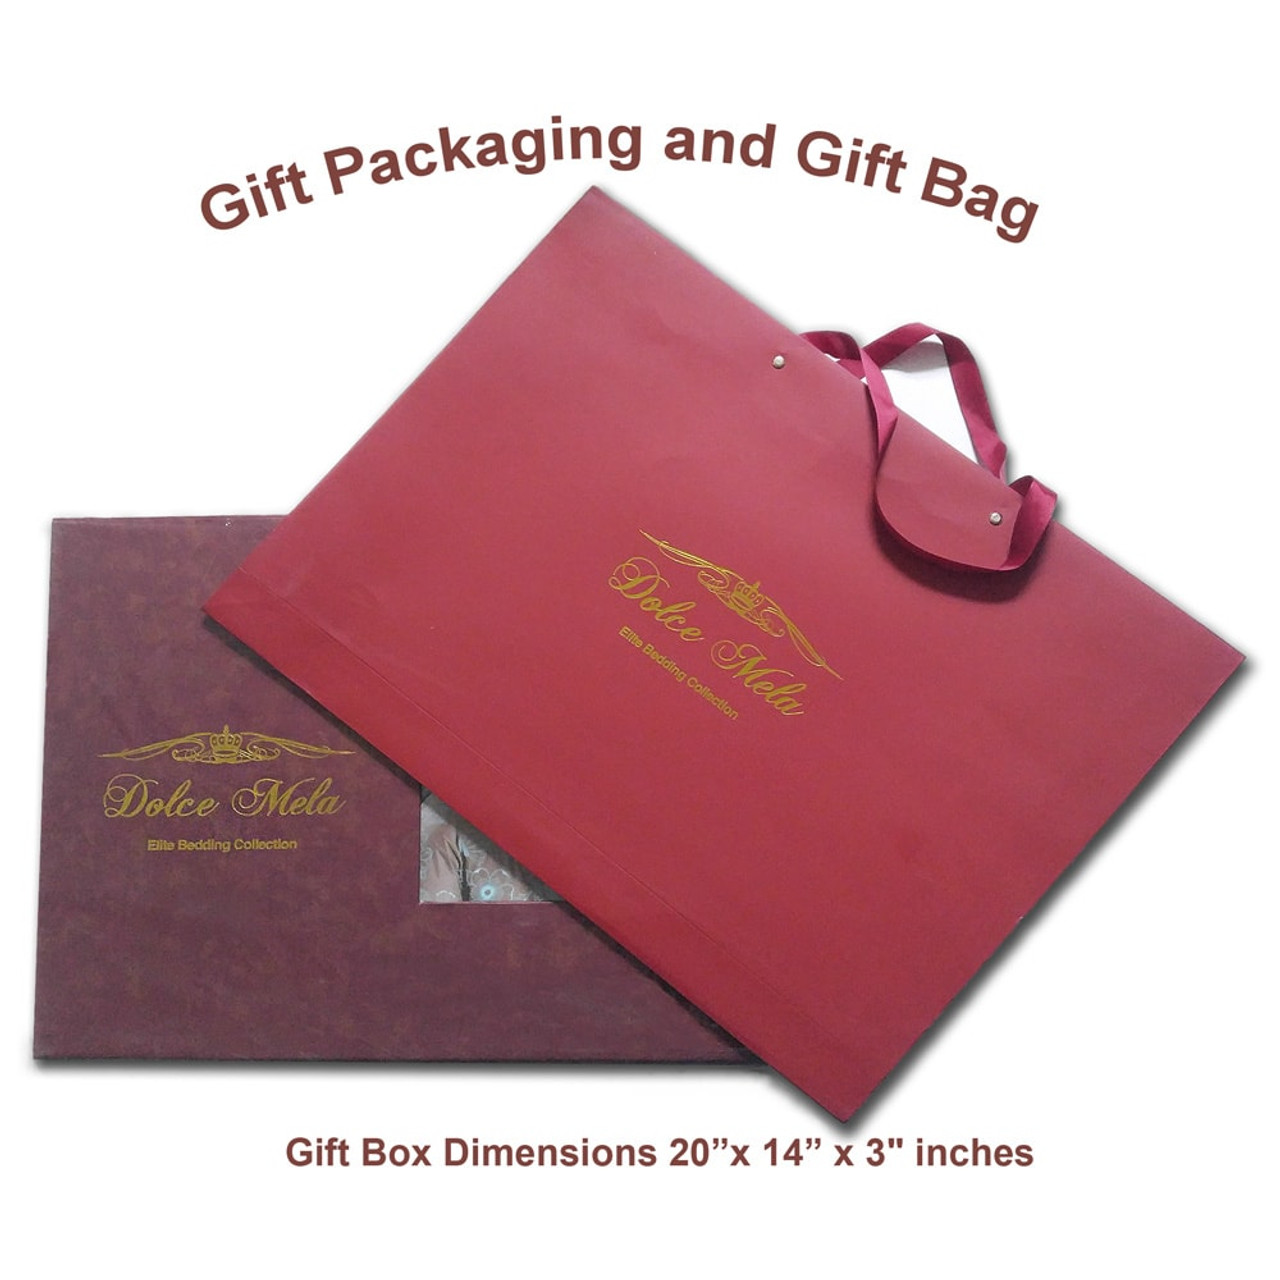 Dolce Mela Bedding  Drop-Shipping Gift Packaging